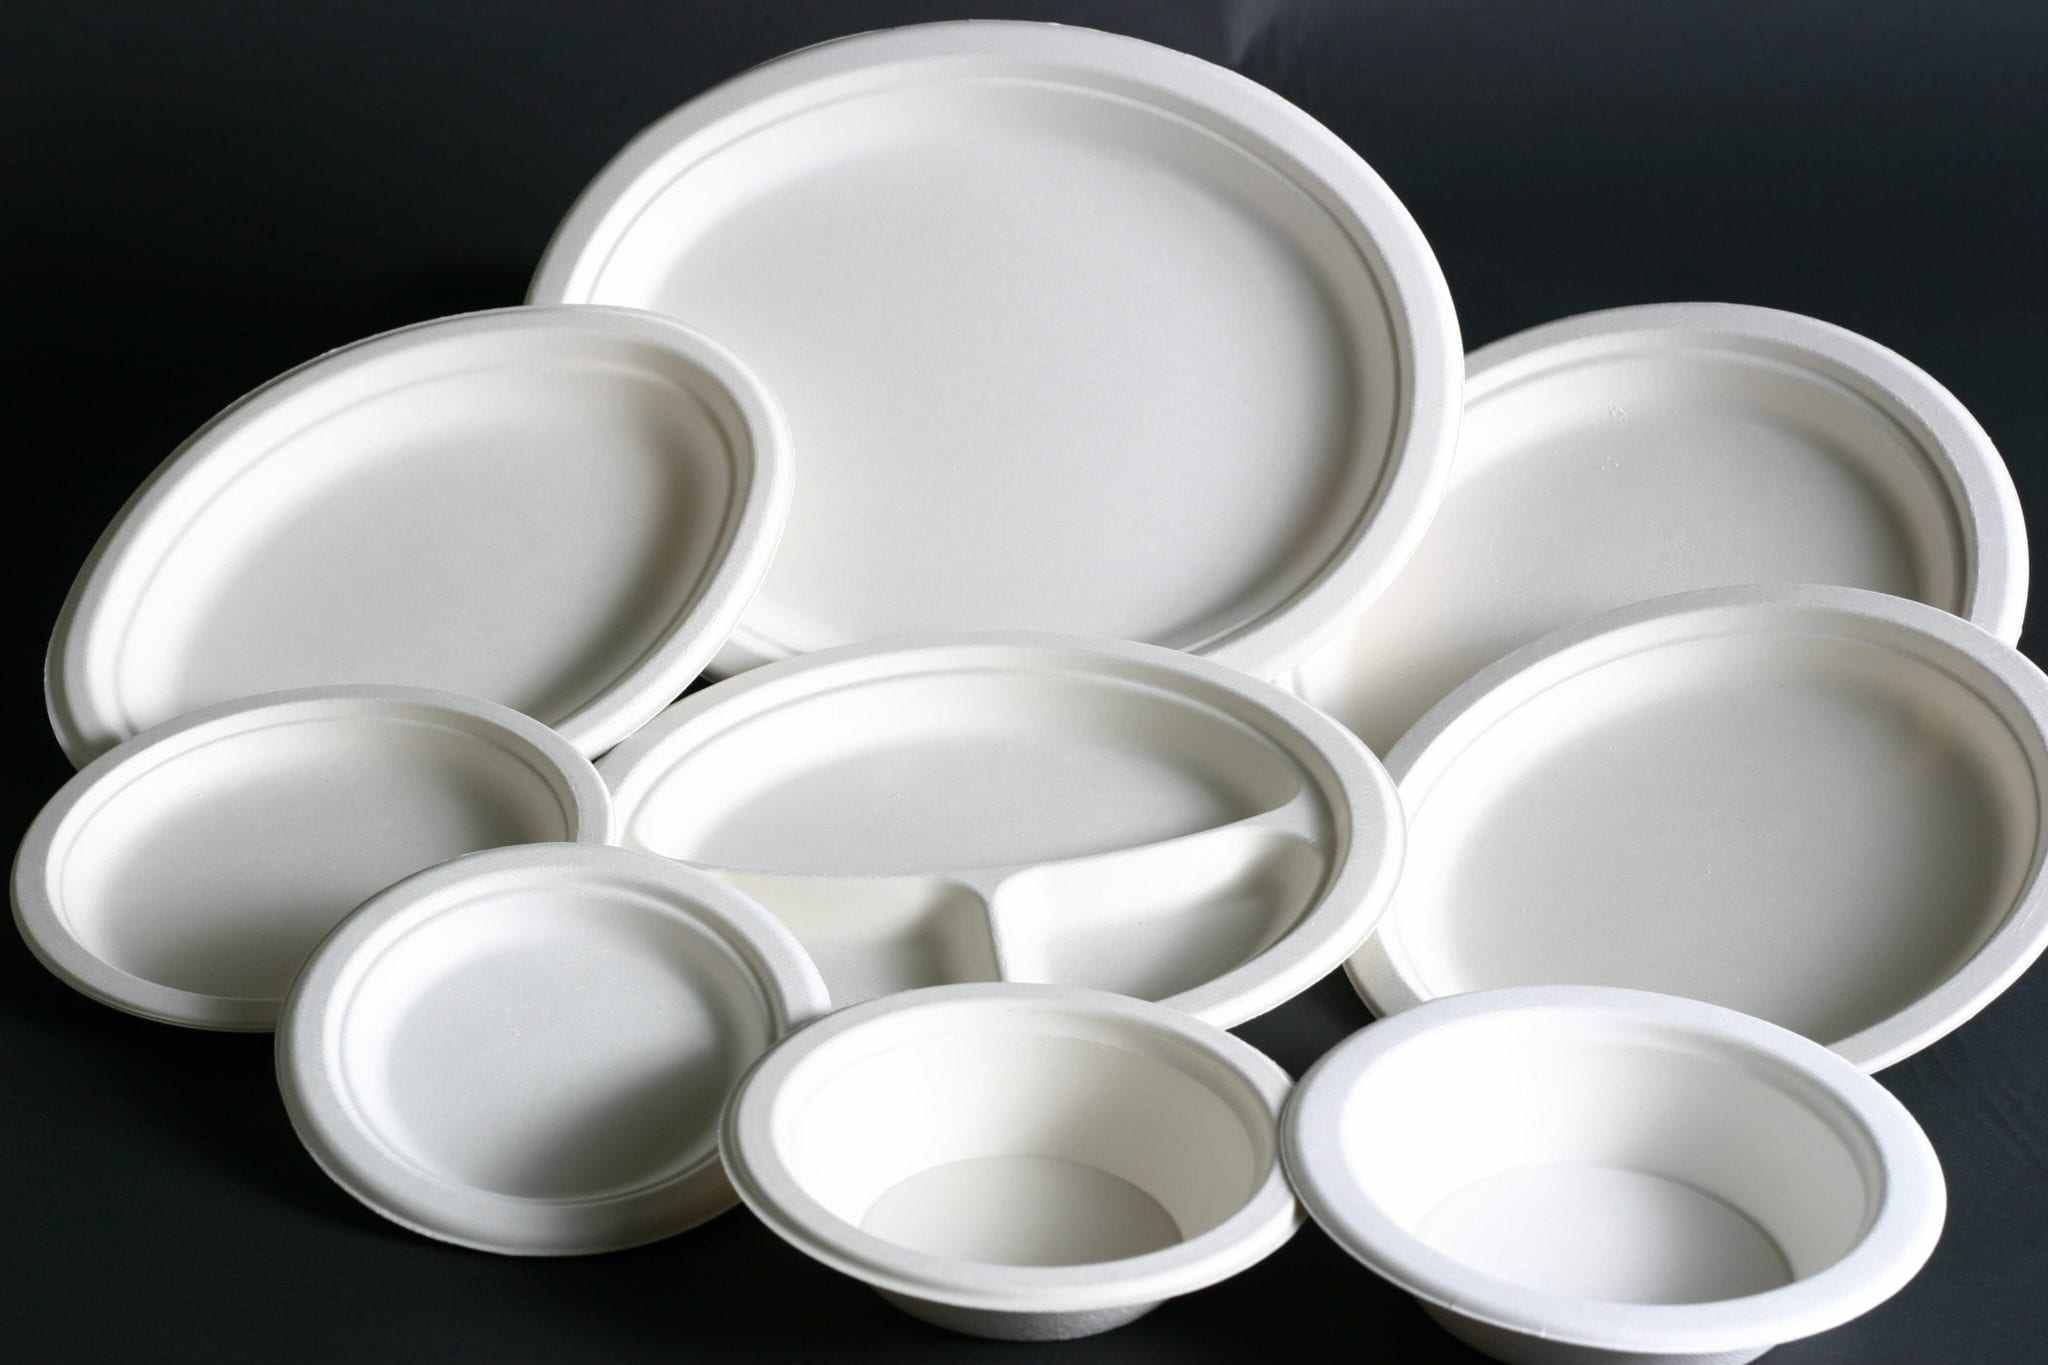 Disposable plastic plates with 6 compartments